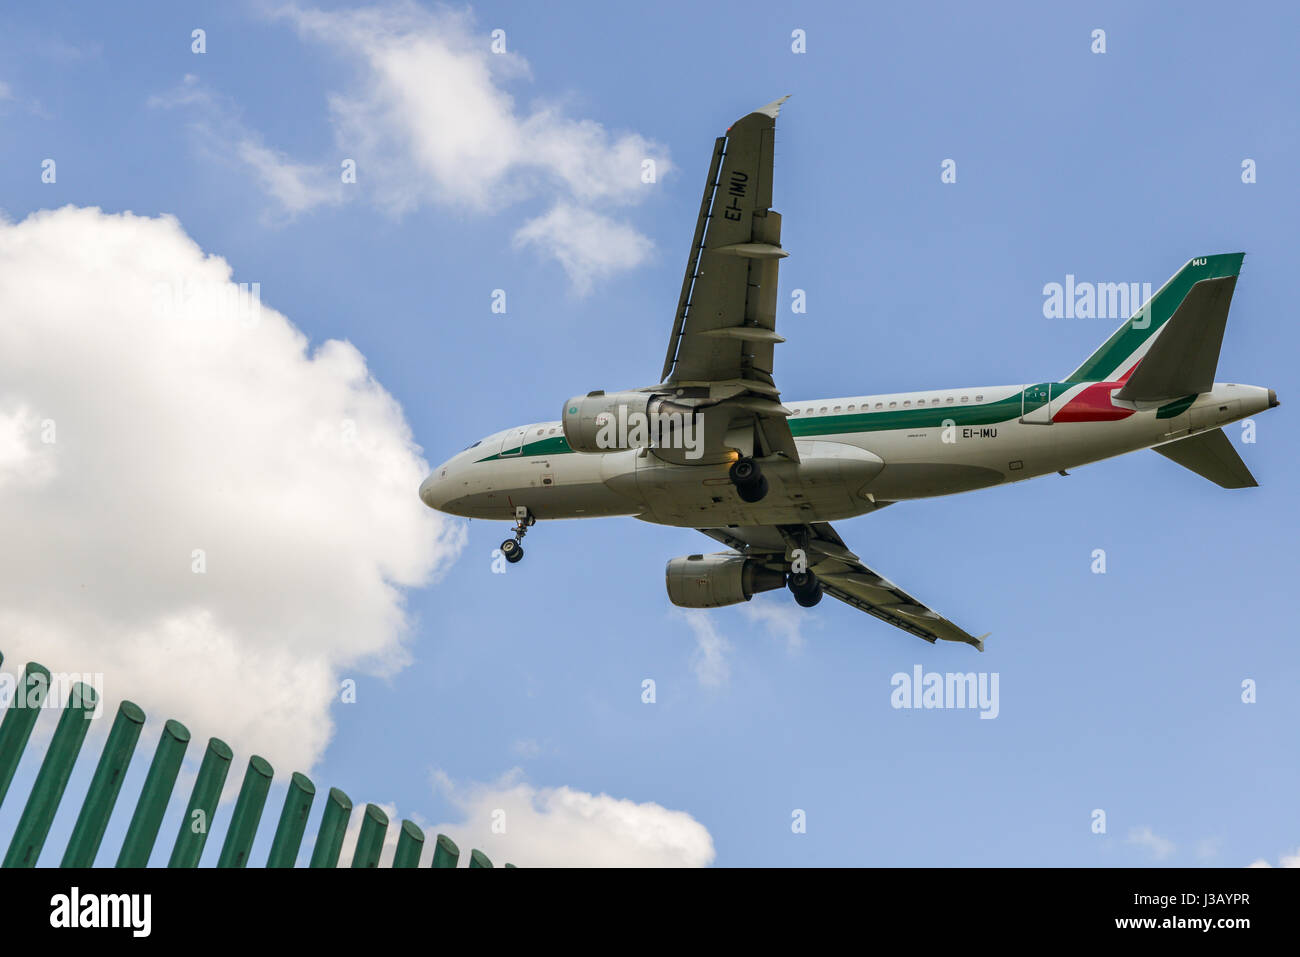 Milan, Italy. 4th May, 2017. On May 2nd, 2017, Italy's national carrier Alitalia filed for its second bankruptcy in 9 years, after its board decided to formally ask the ministry of economic development to put the money-losing carrier, partly owned by UAE's Etihad, under special administration after workers rejected its latest rescue plan meant to unlock much-needed financing Credit: Alexandre Rotenberg/Alamy Live News Stock Photo